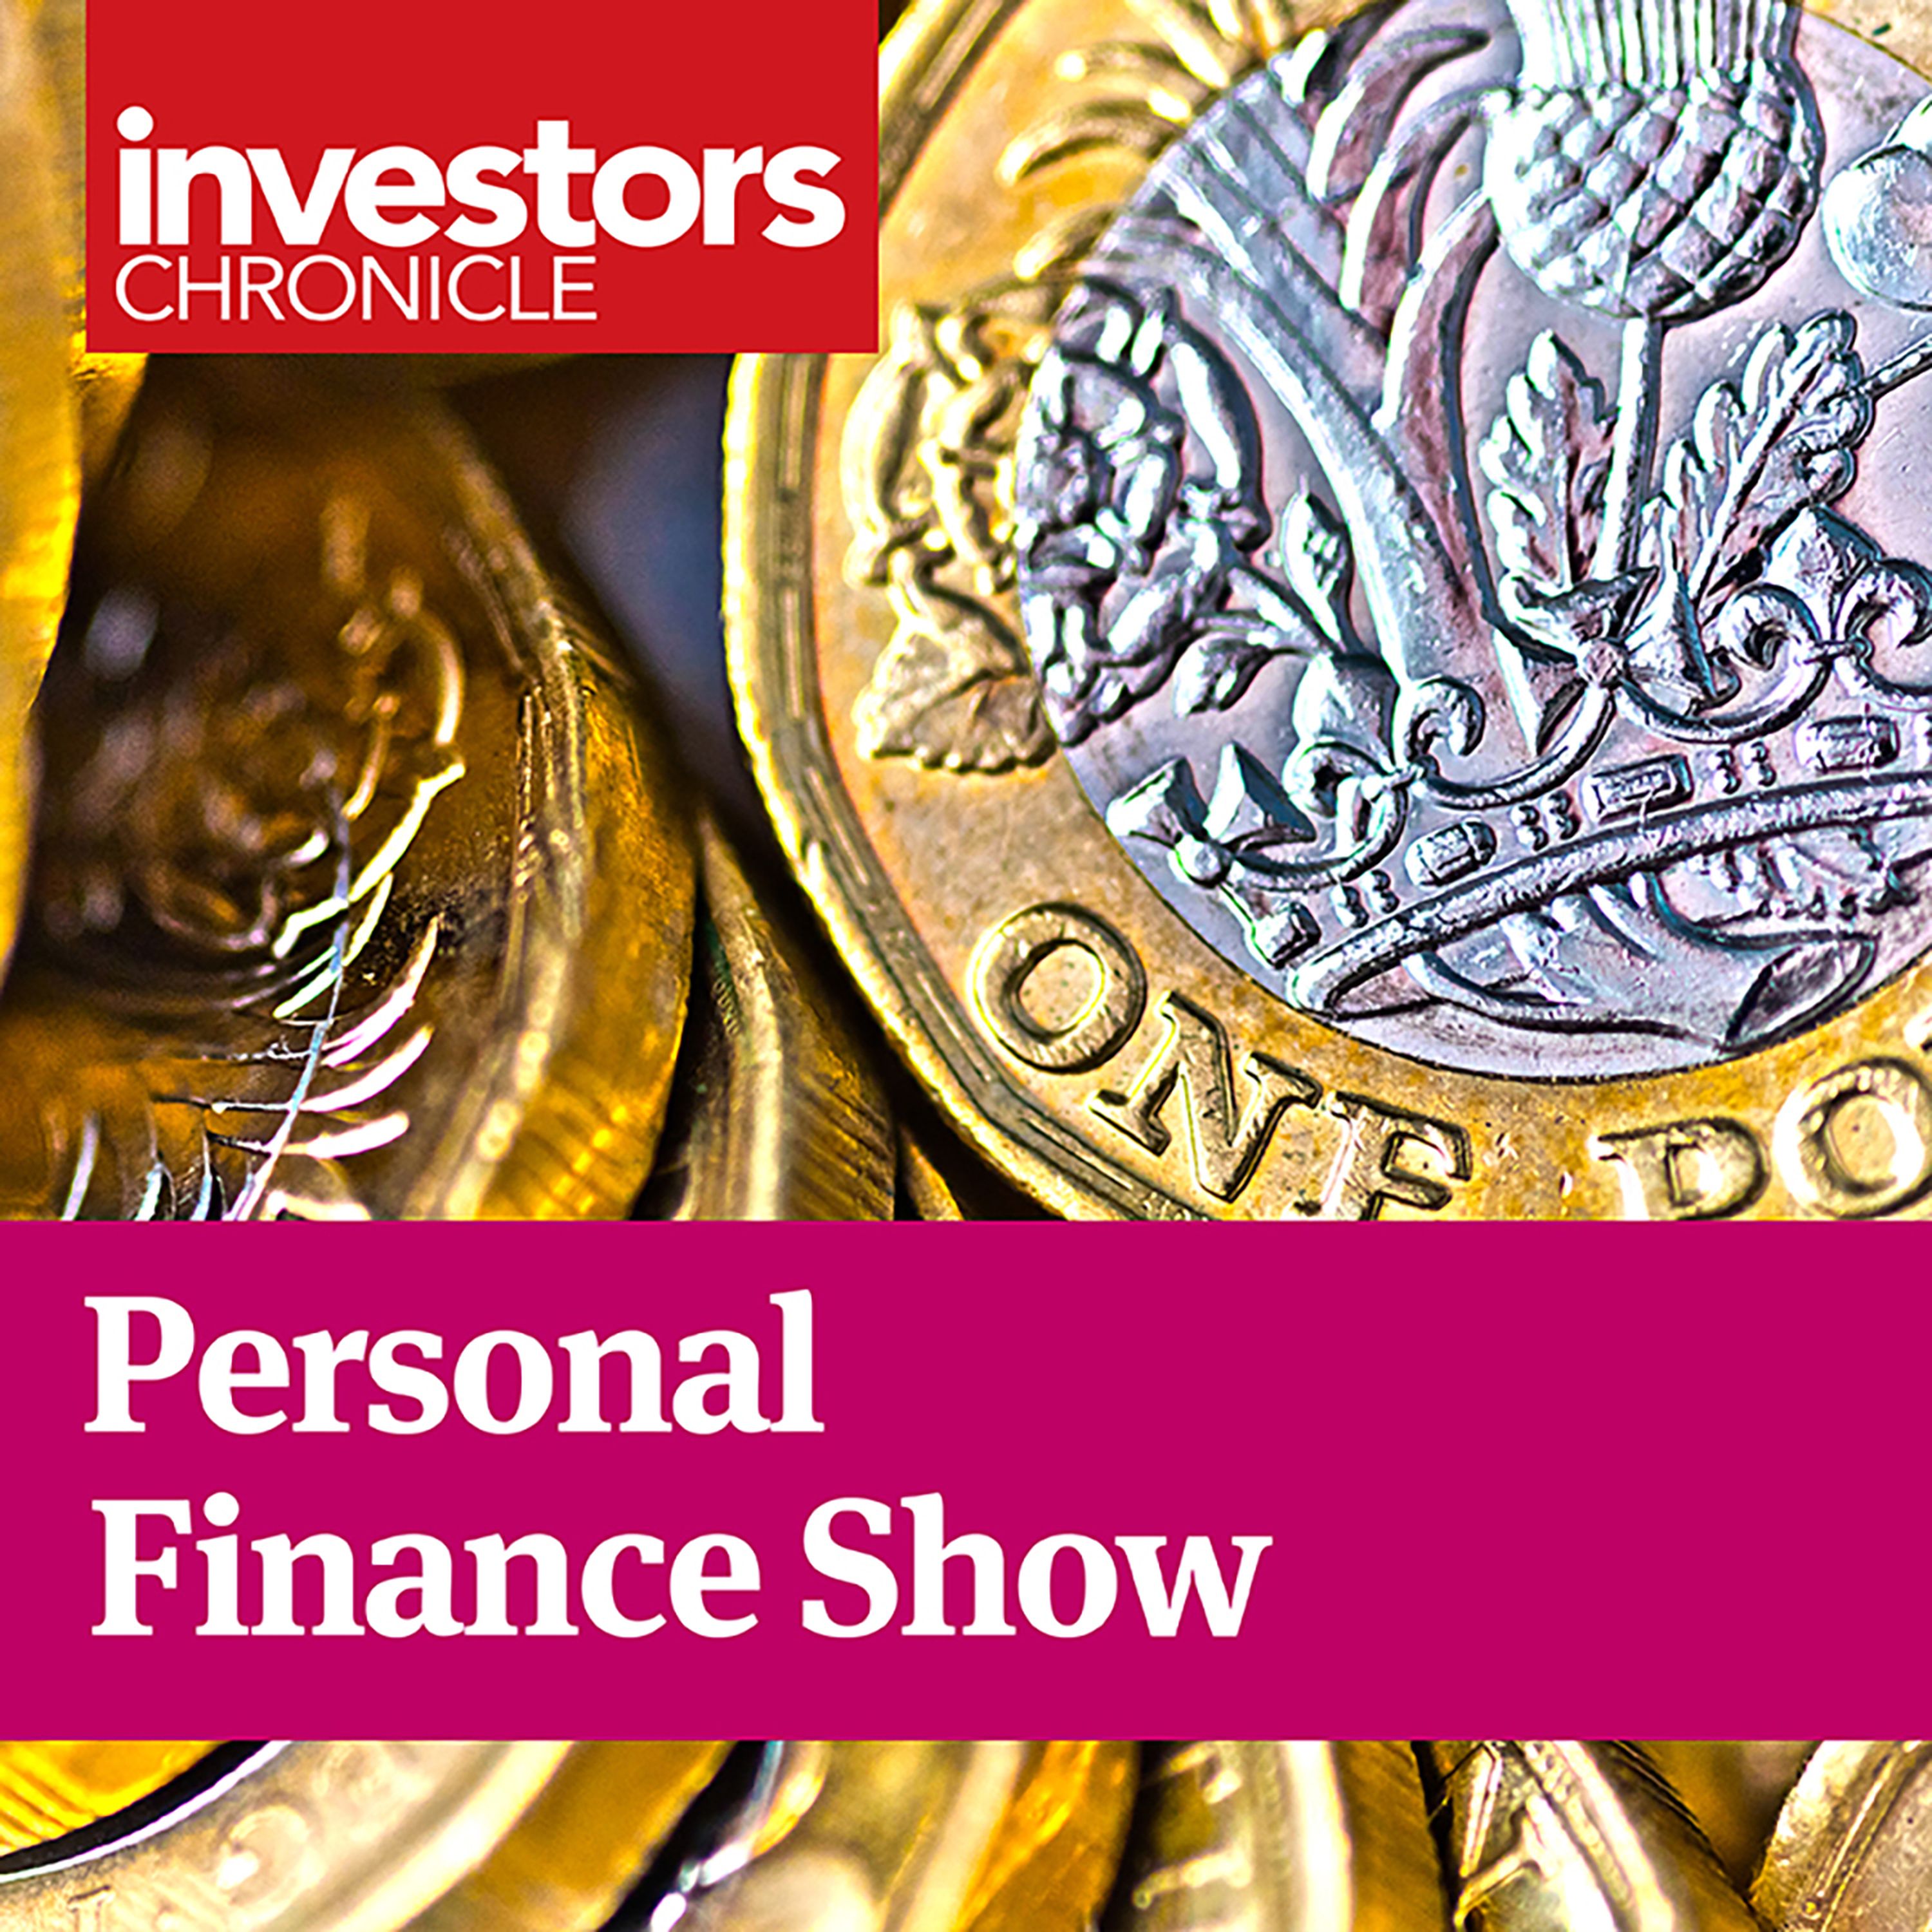 Personal Finance Show: Good out performance and how to find genuine value